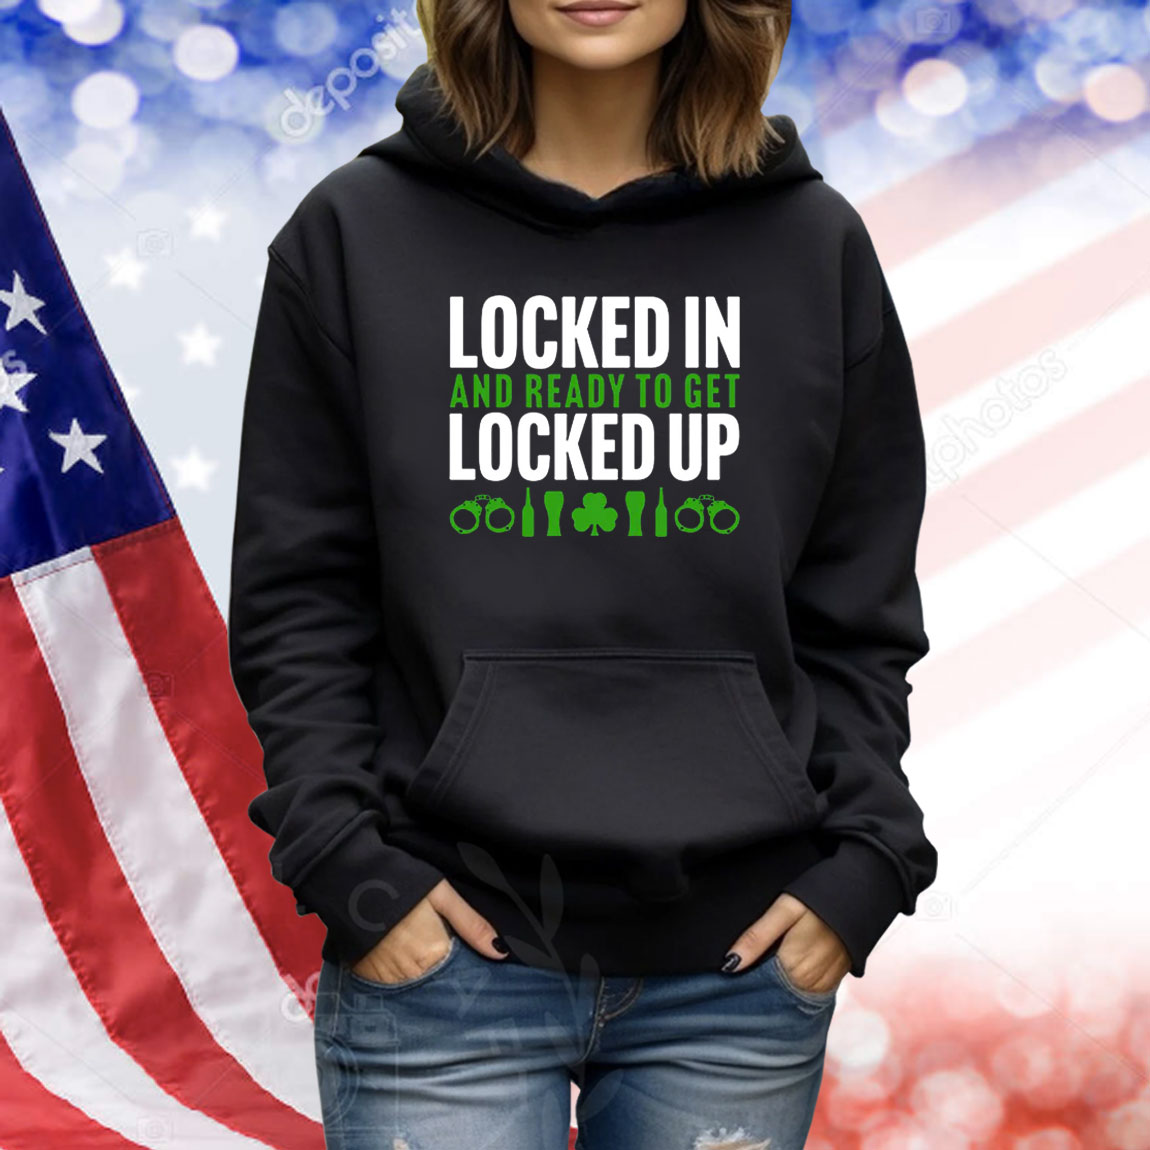 Locked In And Ready To Get Locked Up TShirts